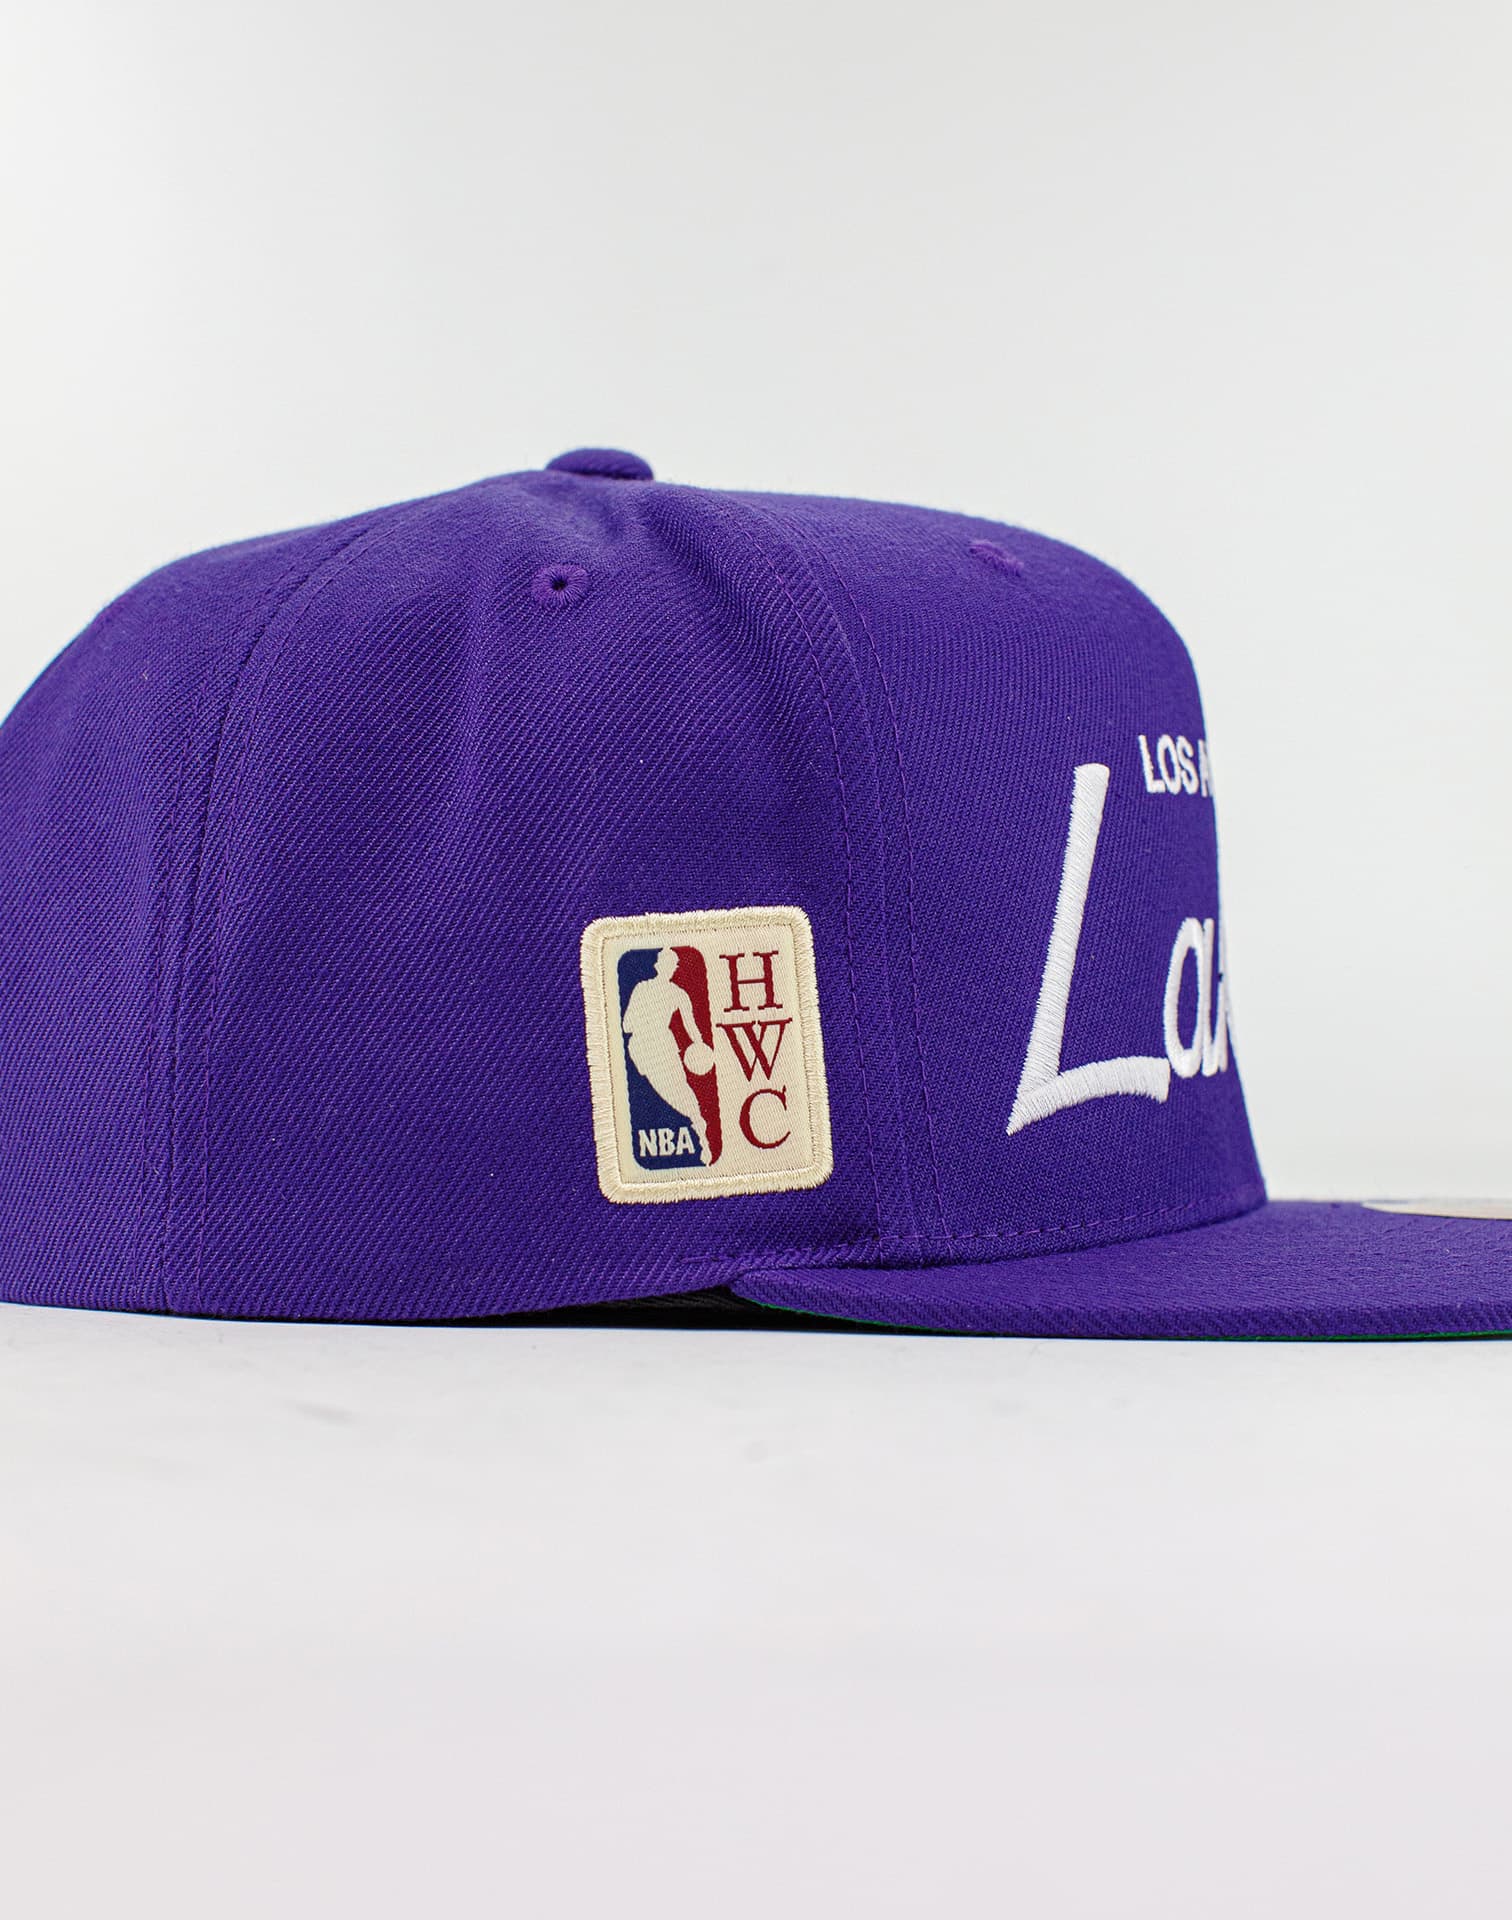 Caps Mitchell & Ness Mitchell Ness Los Angeles Clippers Team Arch Snapback  • shop